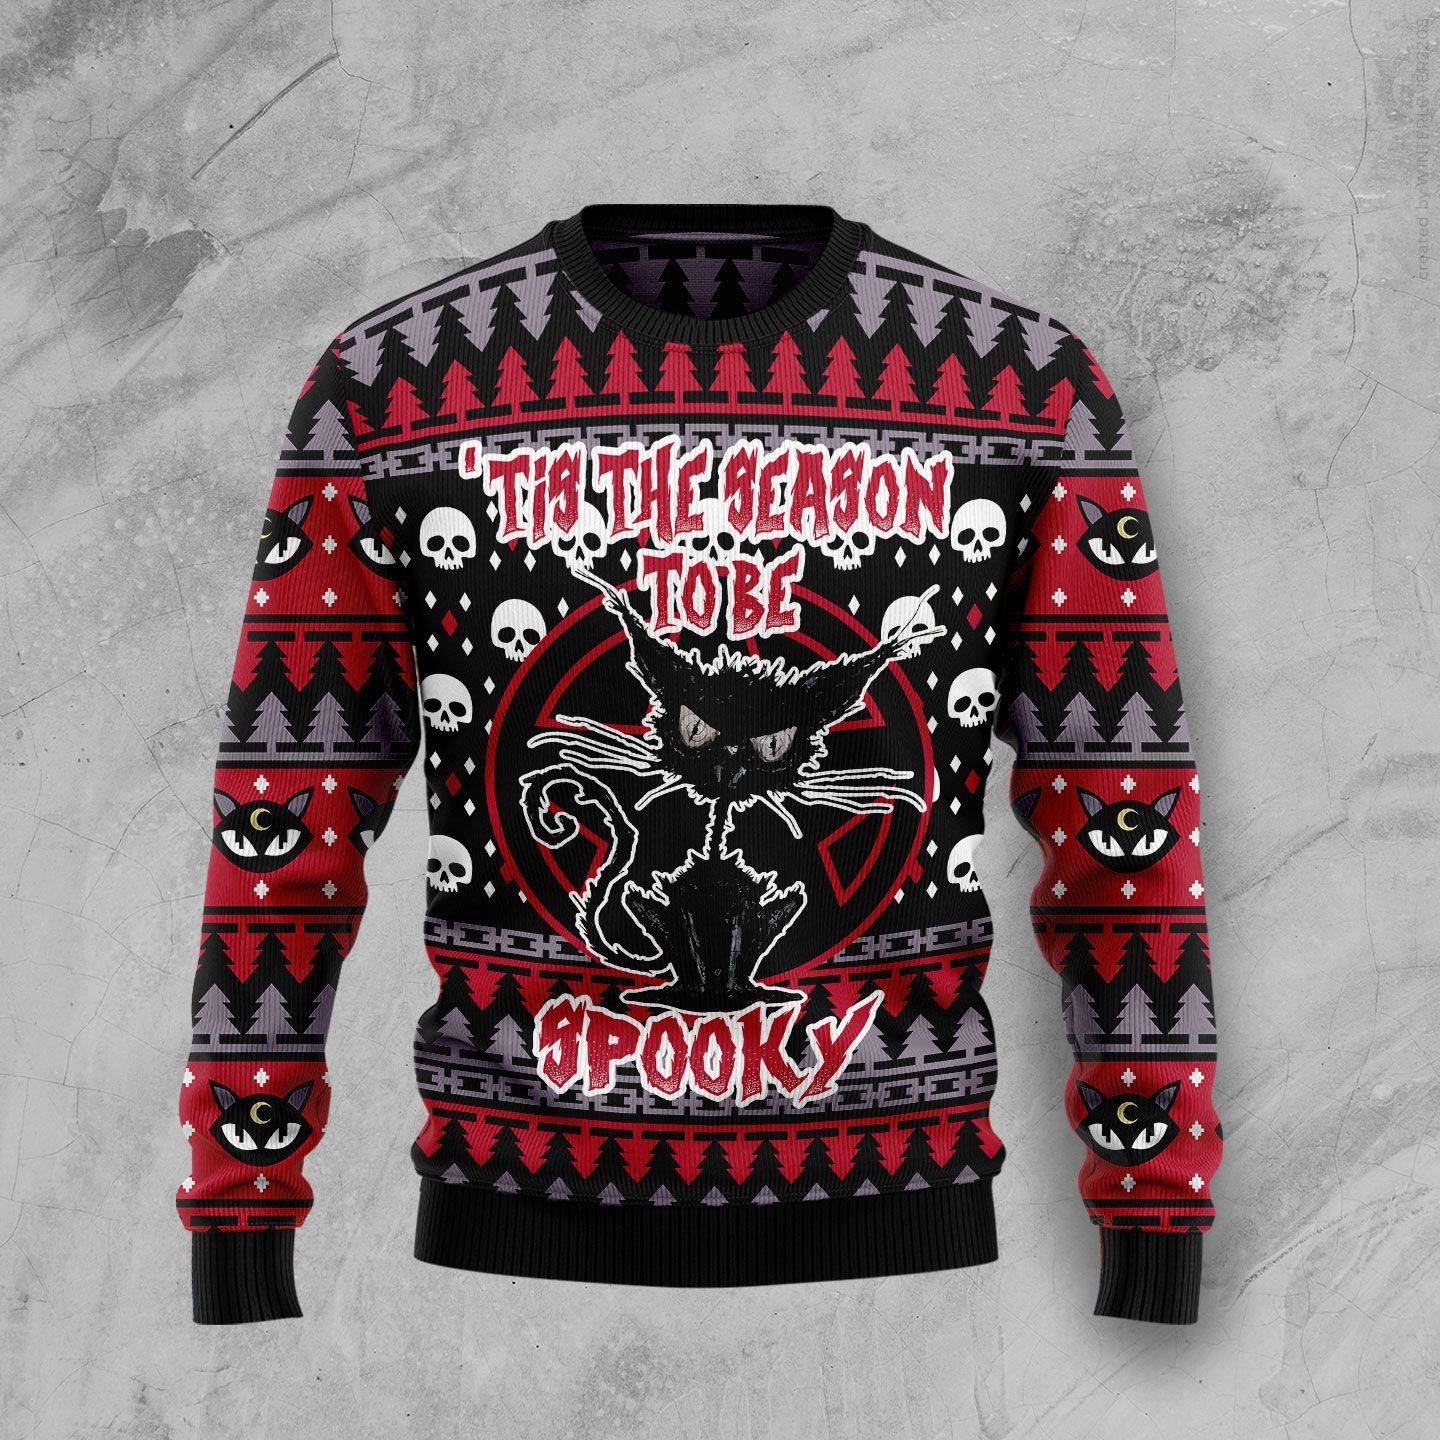 Black Cat Spooky Halloween Ugly Christmas Sweater Ugly Sweater For Men Women, Holiday Sweater